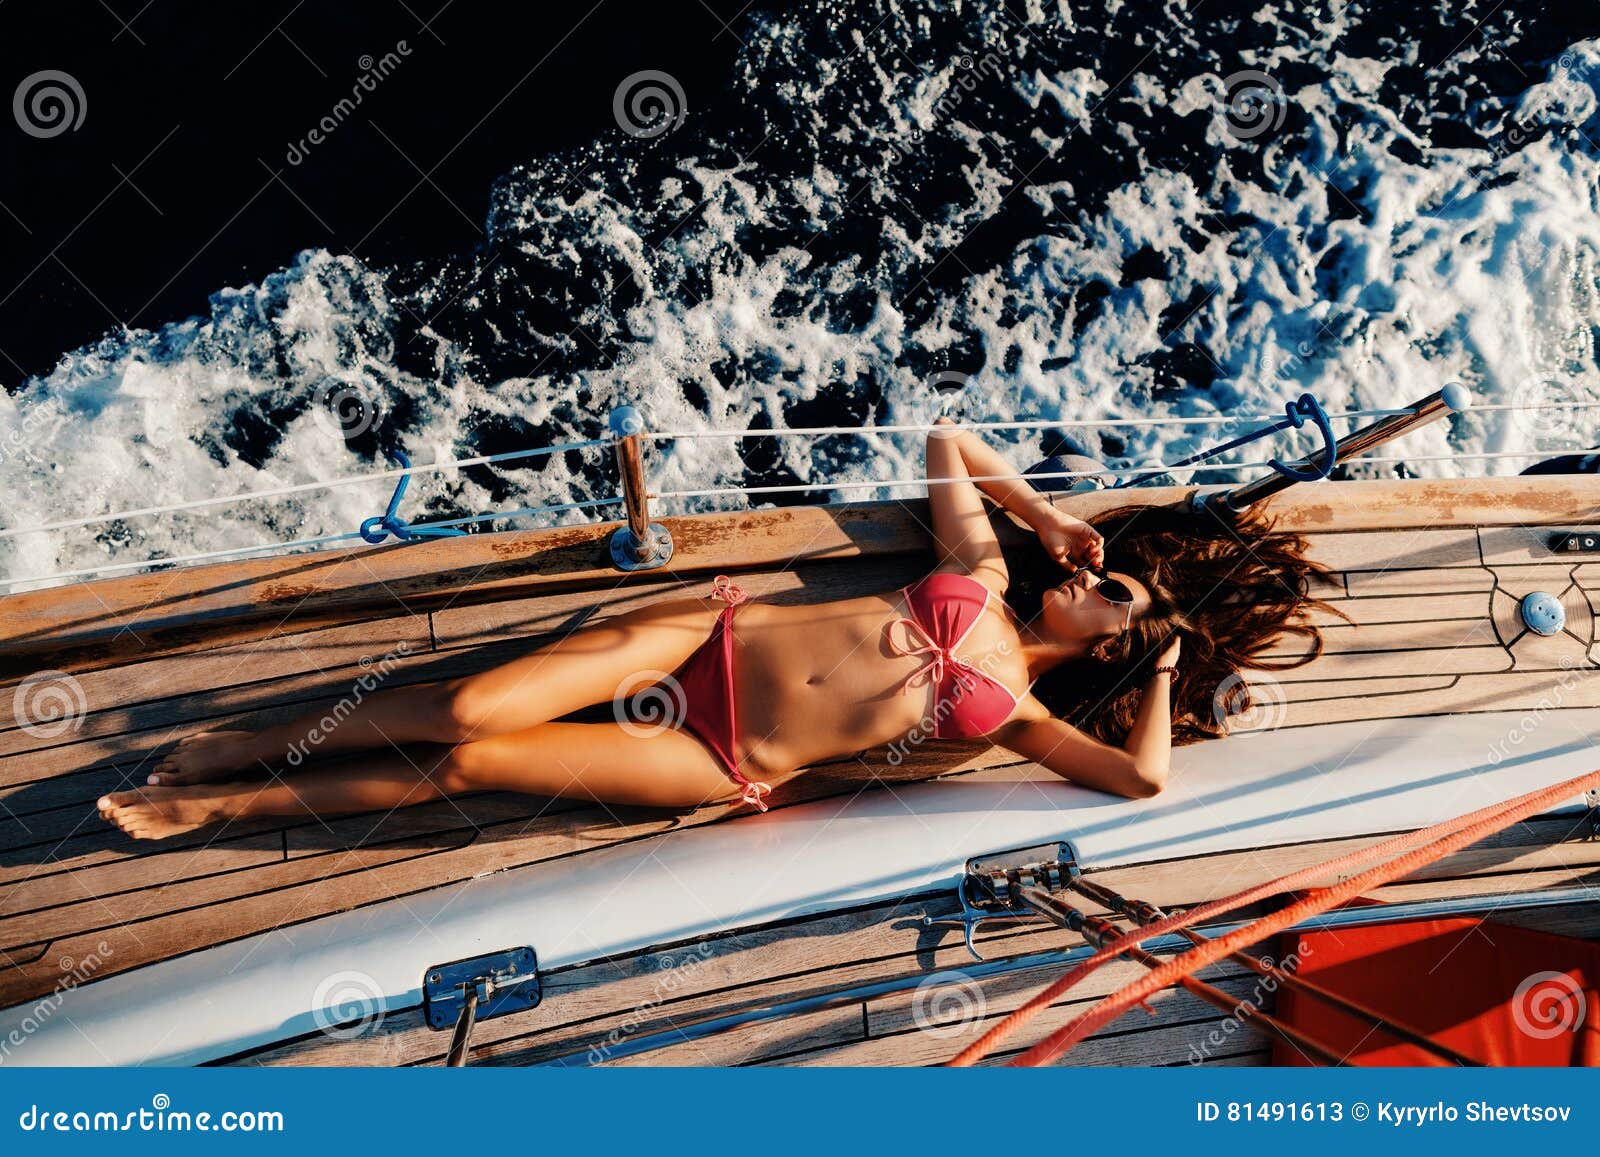 luxury woman yachting in sea top view